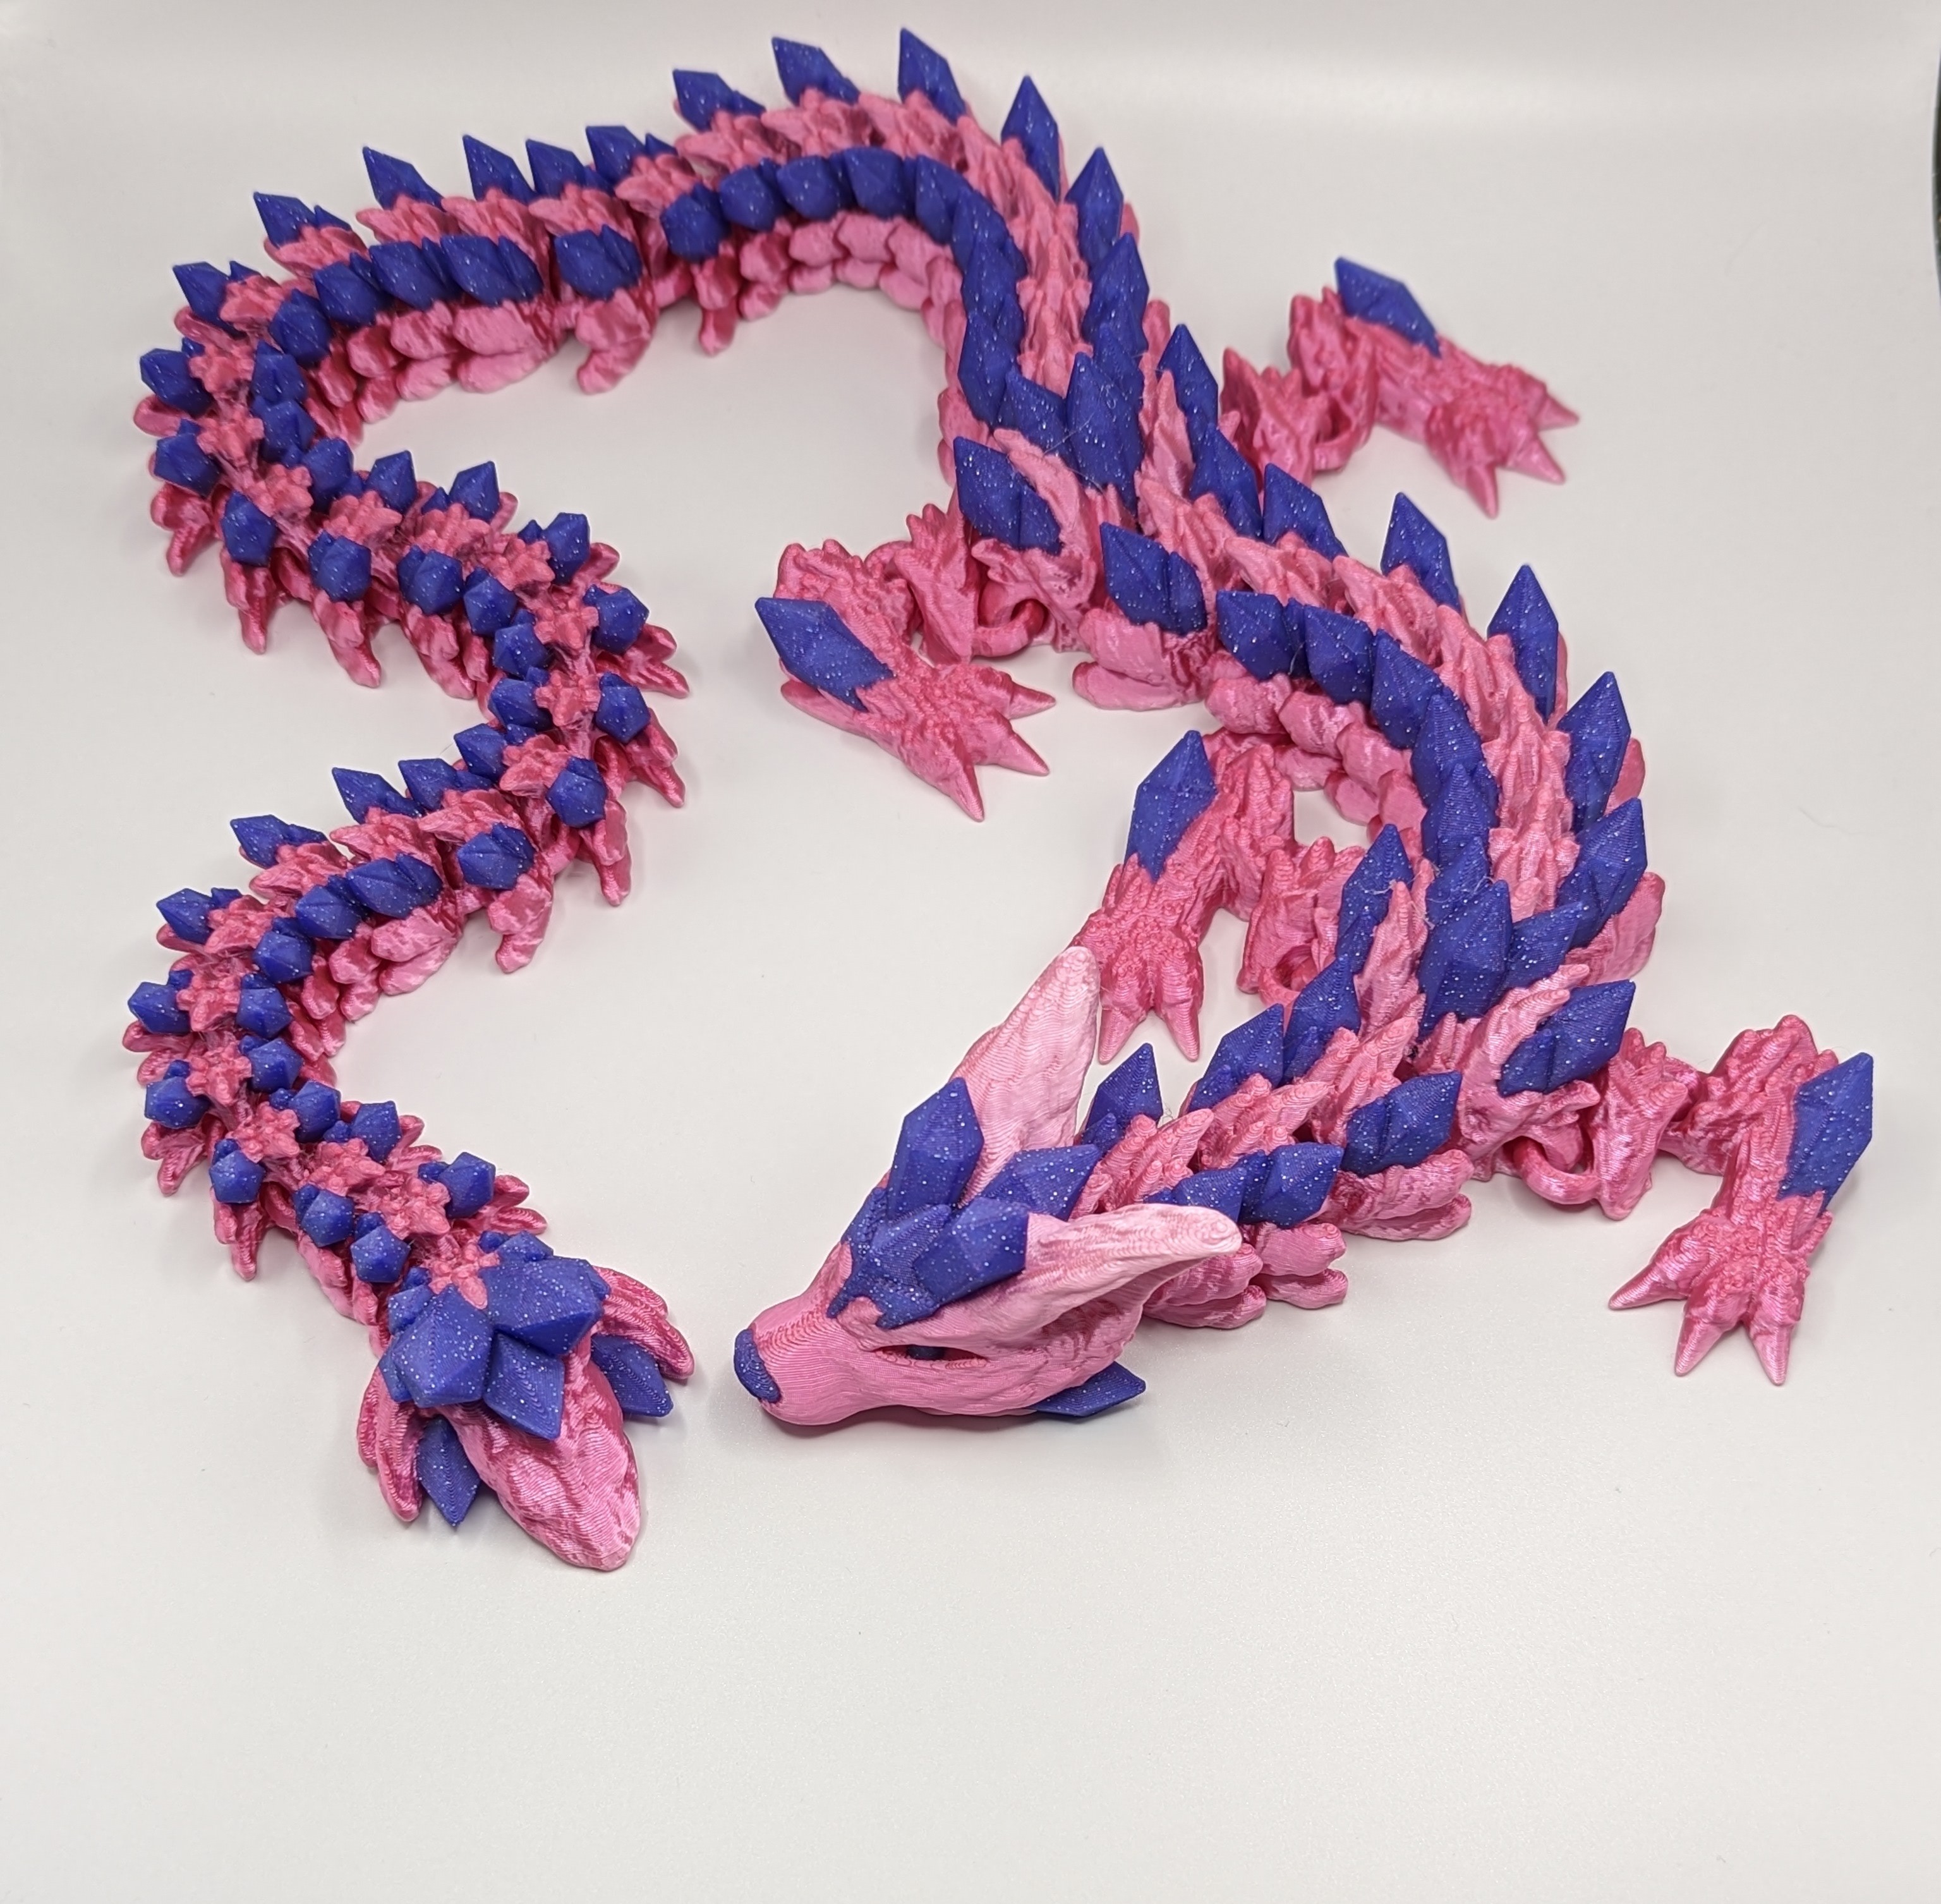 Articulated 3D Printed Giant Wolf Fidget Toy 